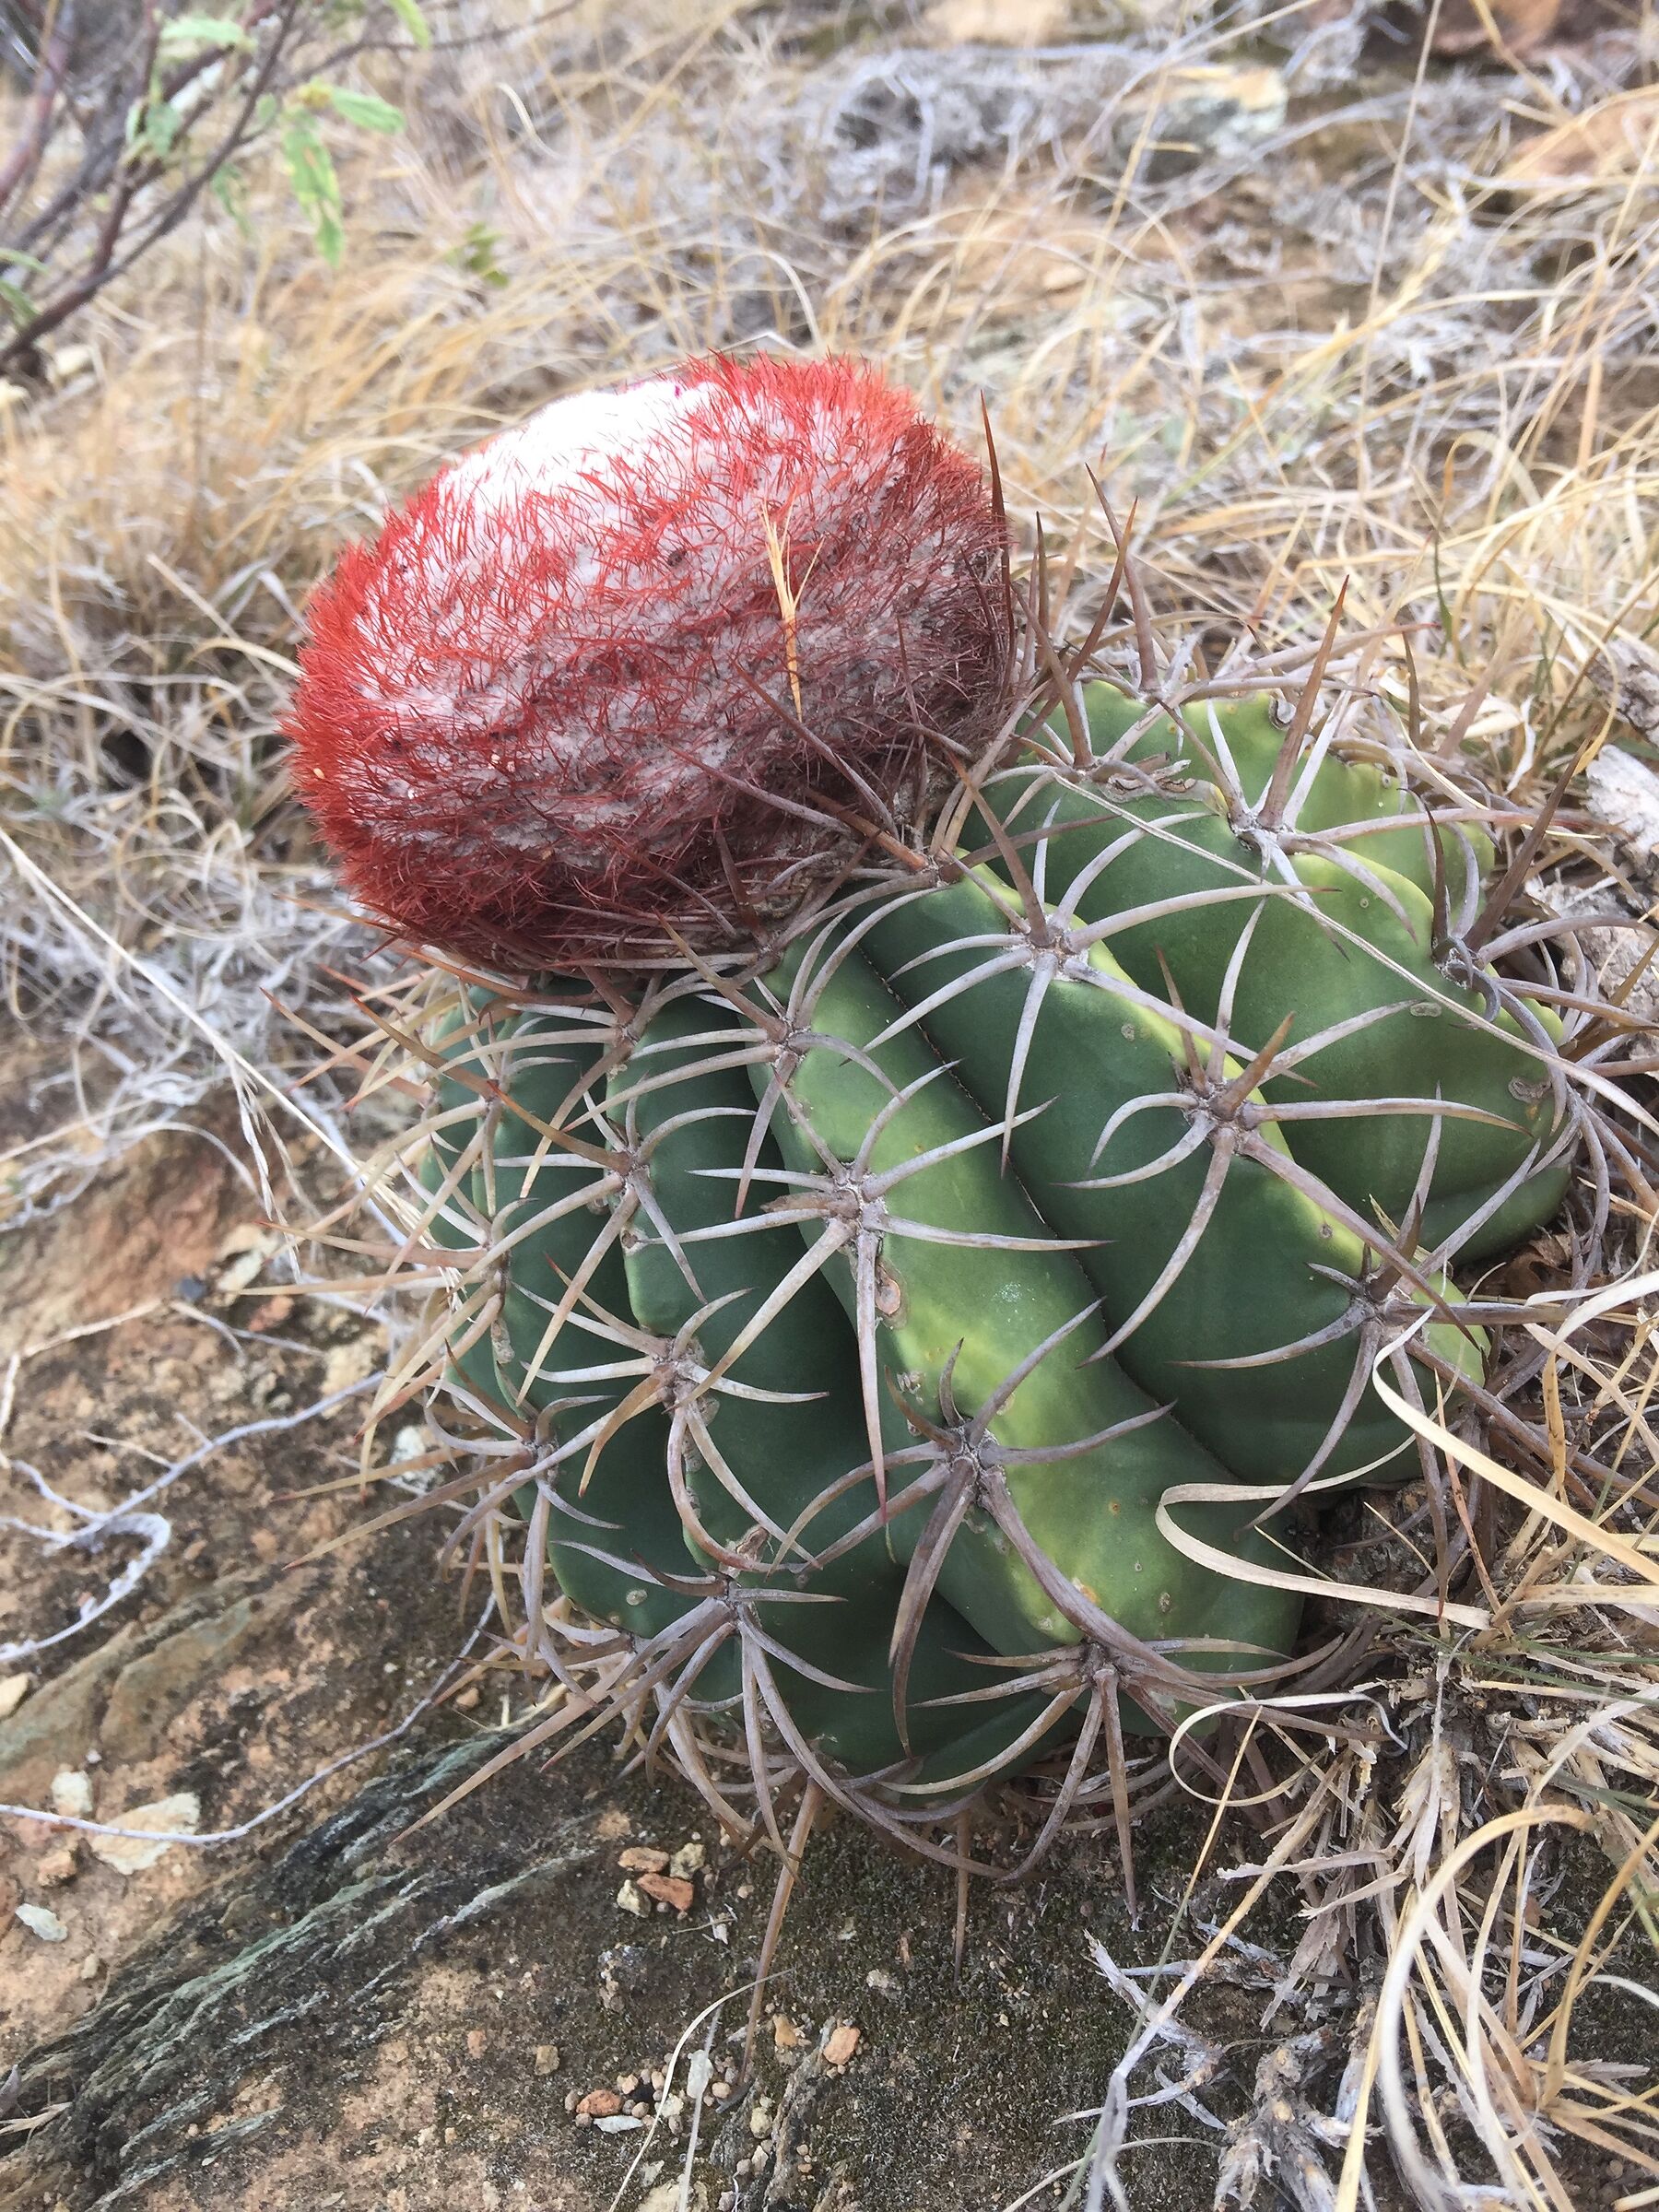 Cactus with edible fruit ...